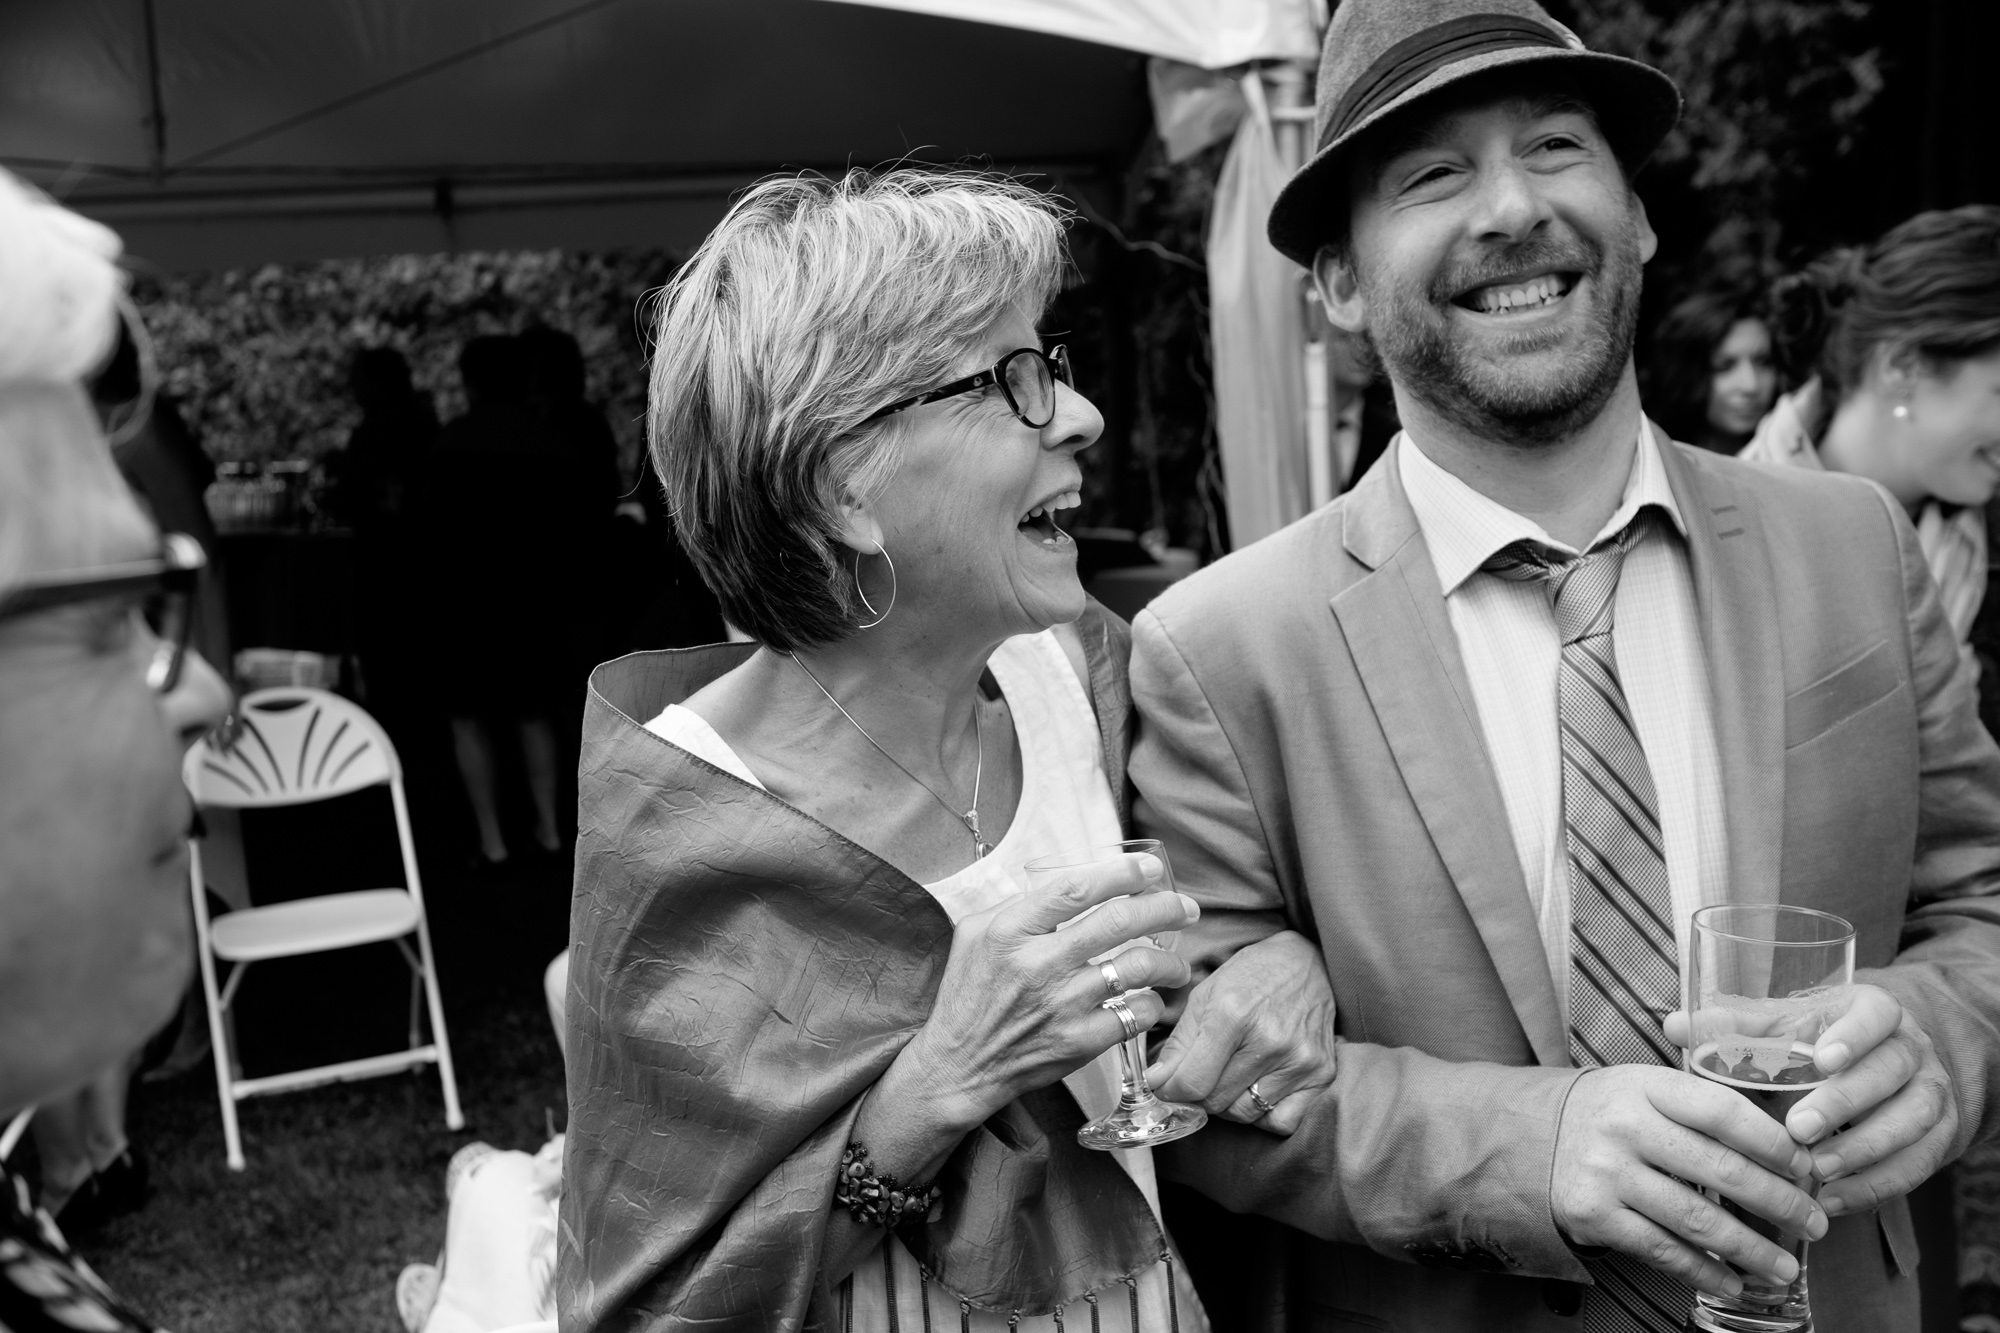  Joel's mom shares a laugh with the wedding MC during the cocktail hour at their wedding in Tobermory. 